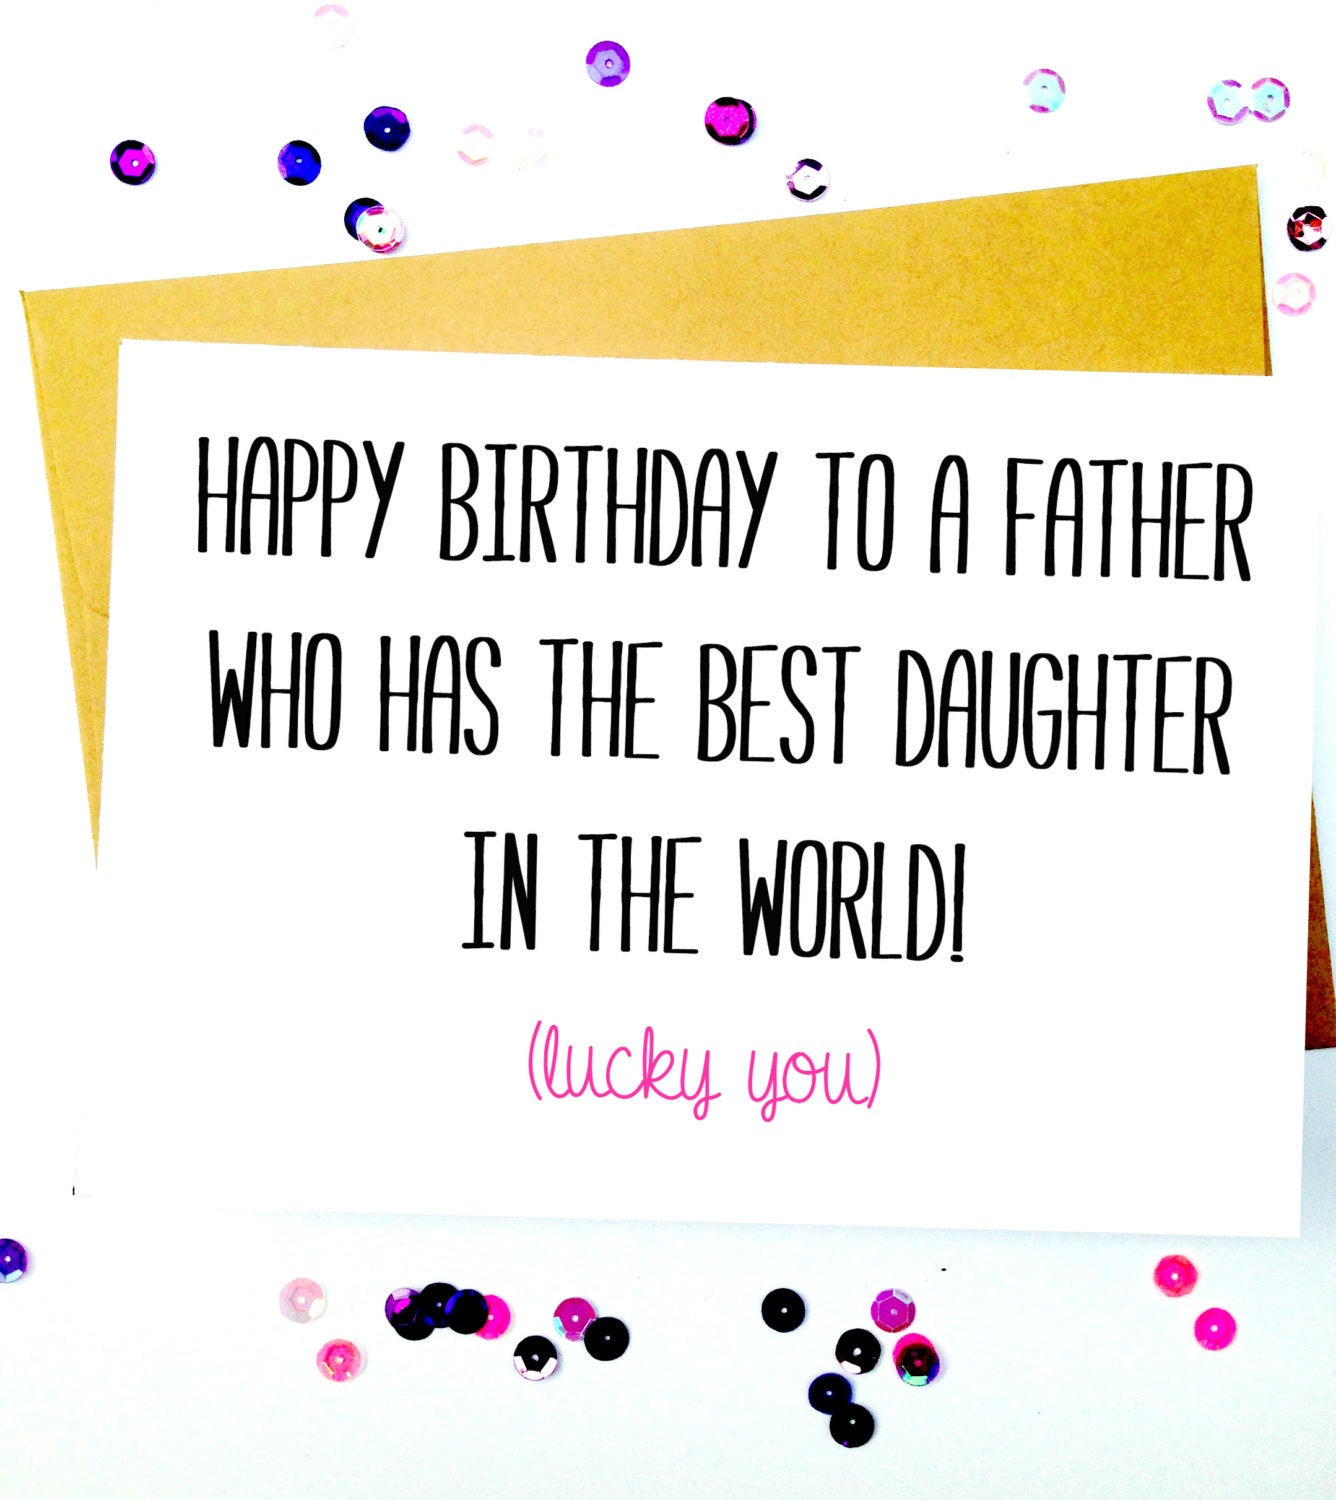 pin on my saves - funny birthday cards for dad from daughter printable ...